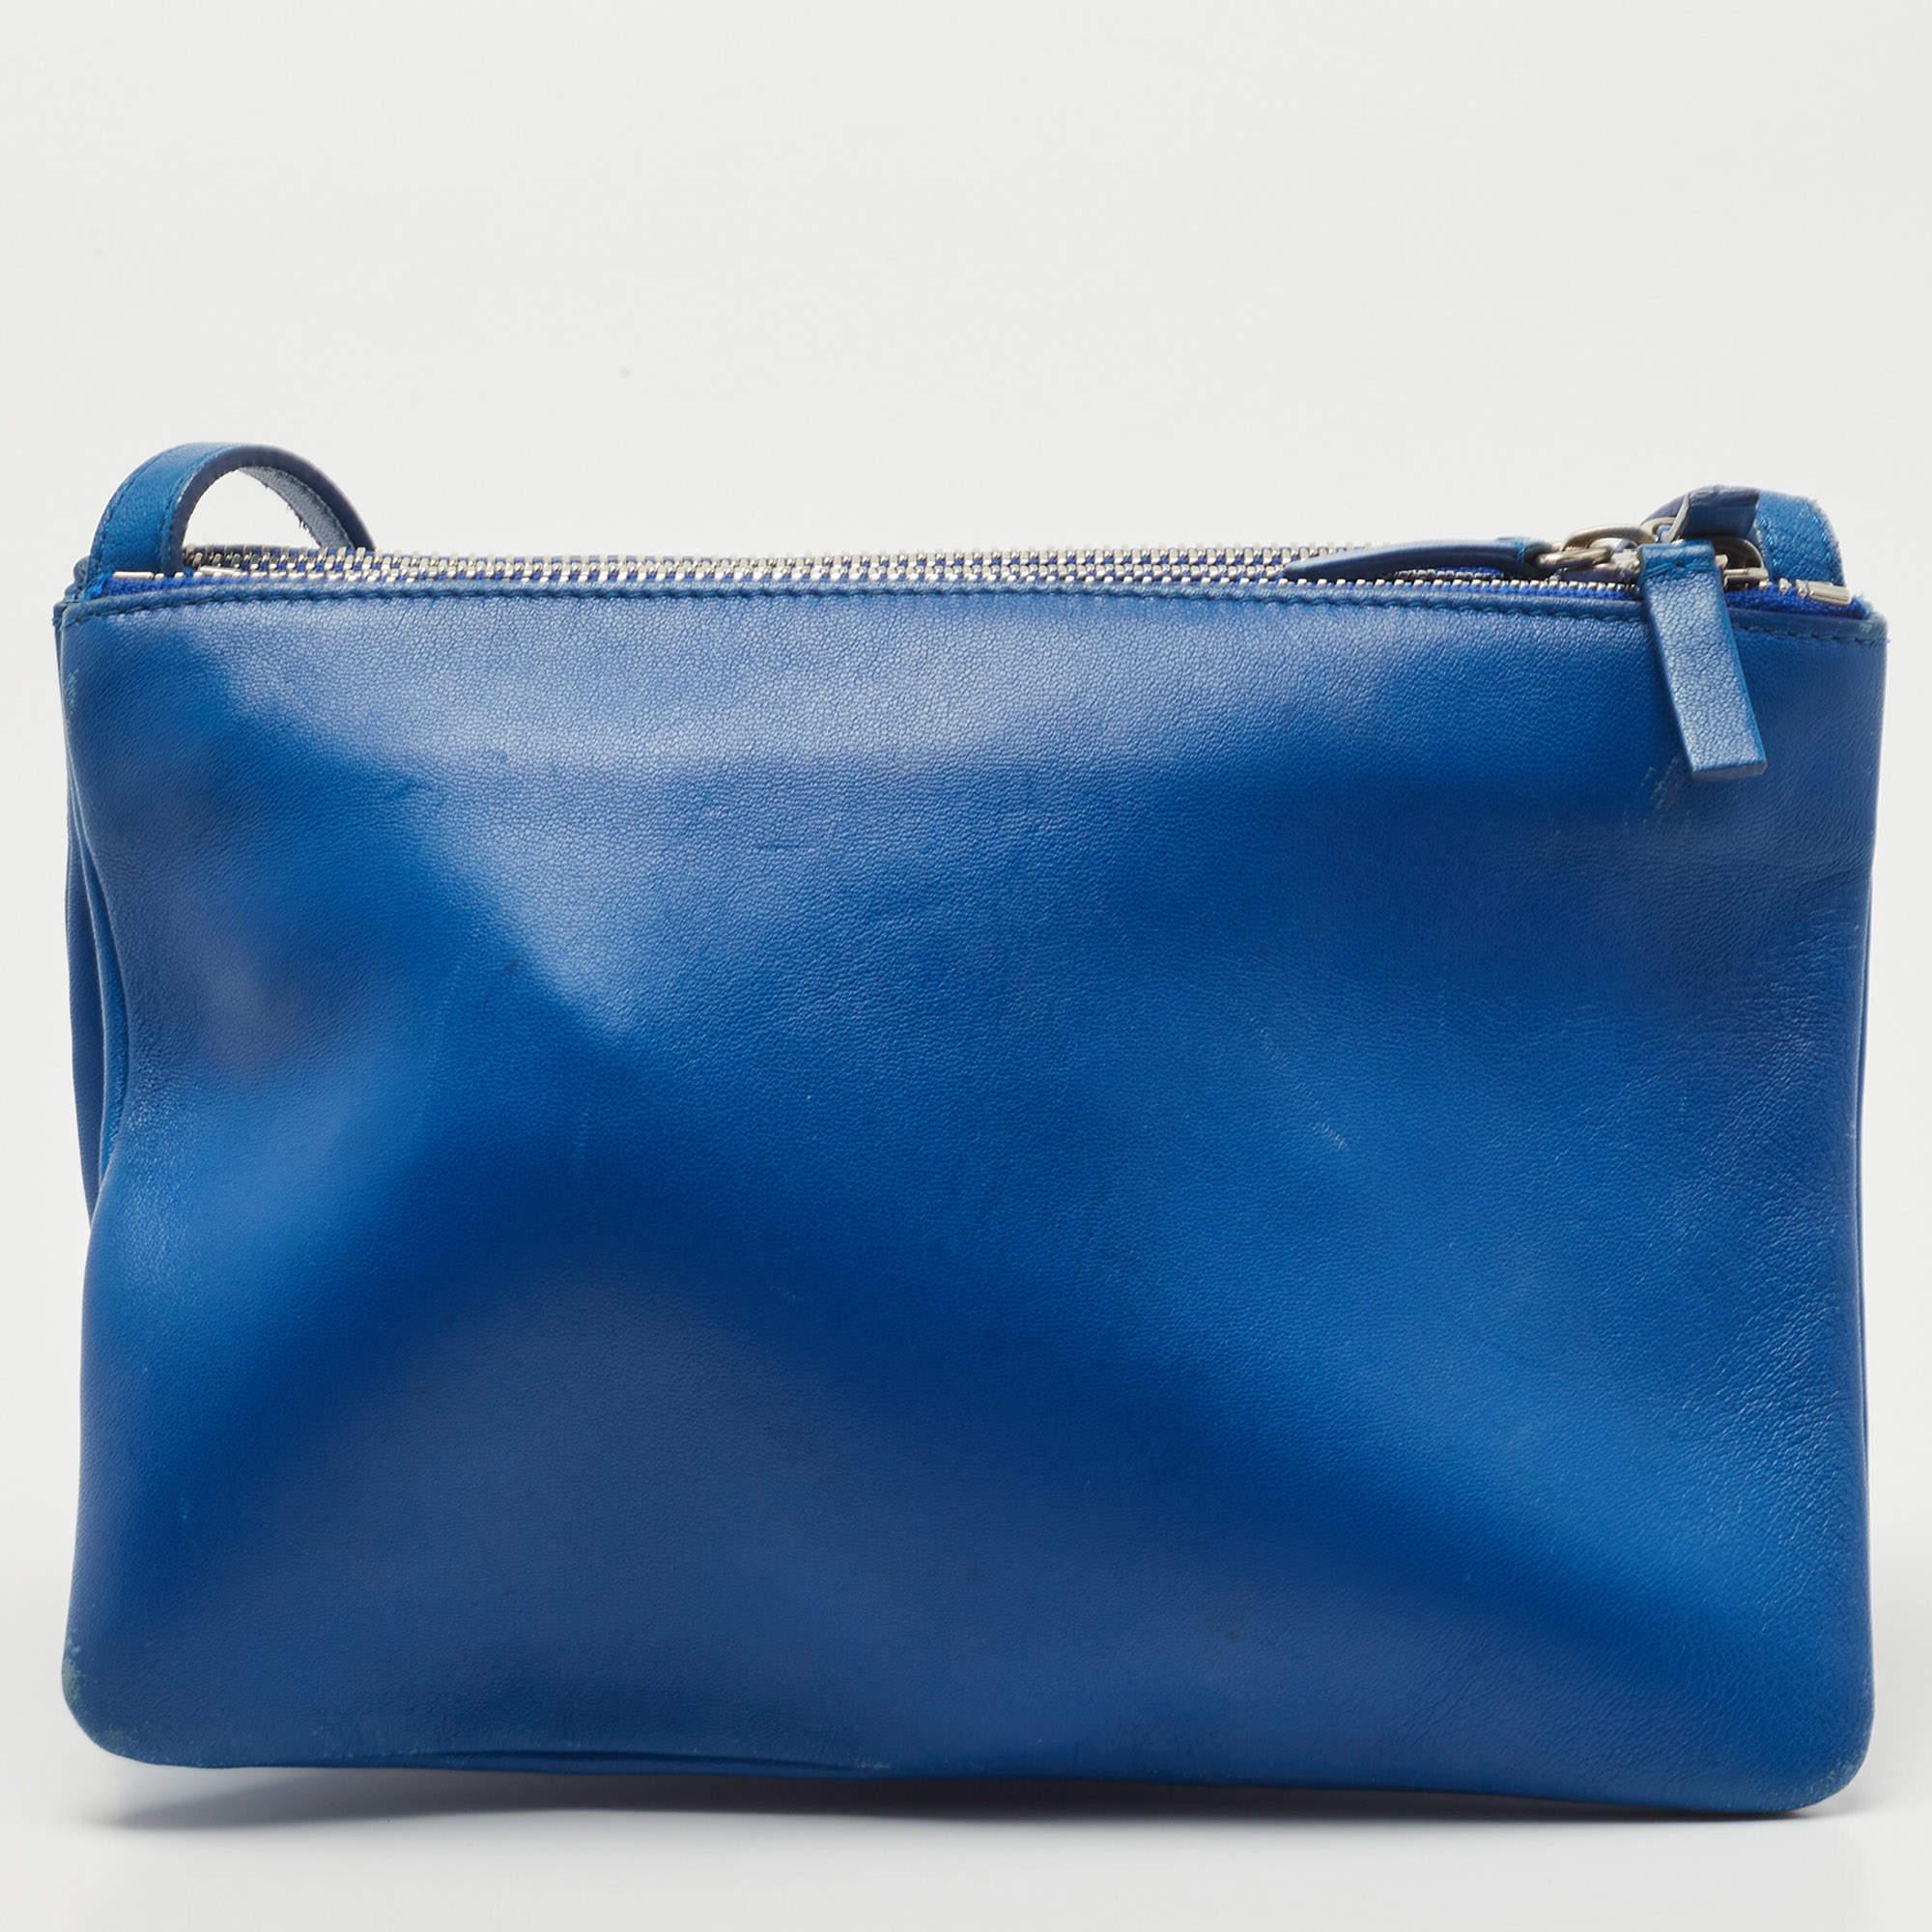 An accessory of great style, this Trio crossbody bag from Celine will be a delight to own. It is rendered in blue leather and features three separate compartments, lined with fabric and secured by gold-tone zippers. Complete with a shoulder strap,